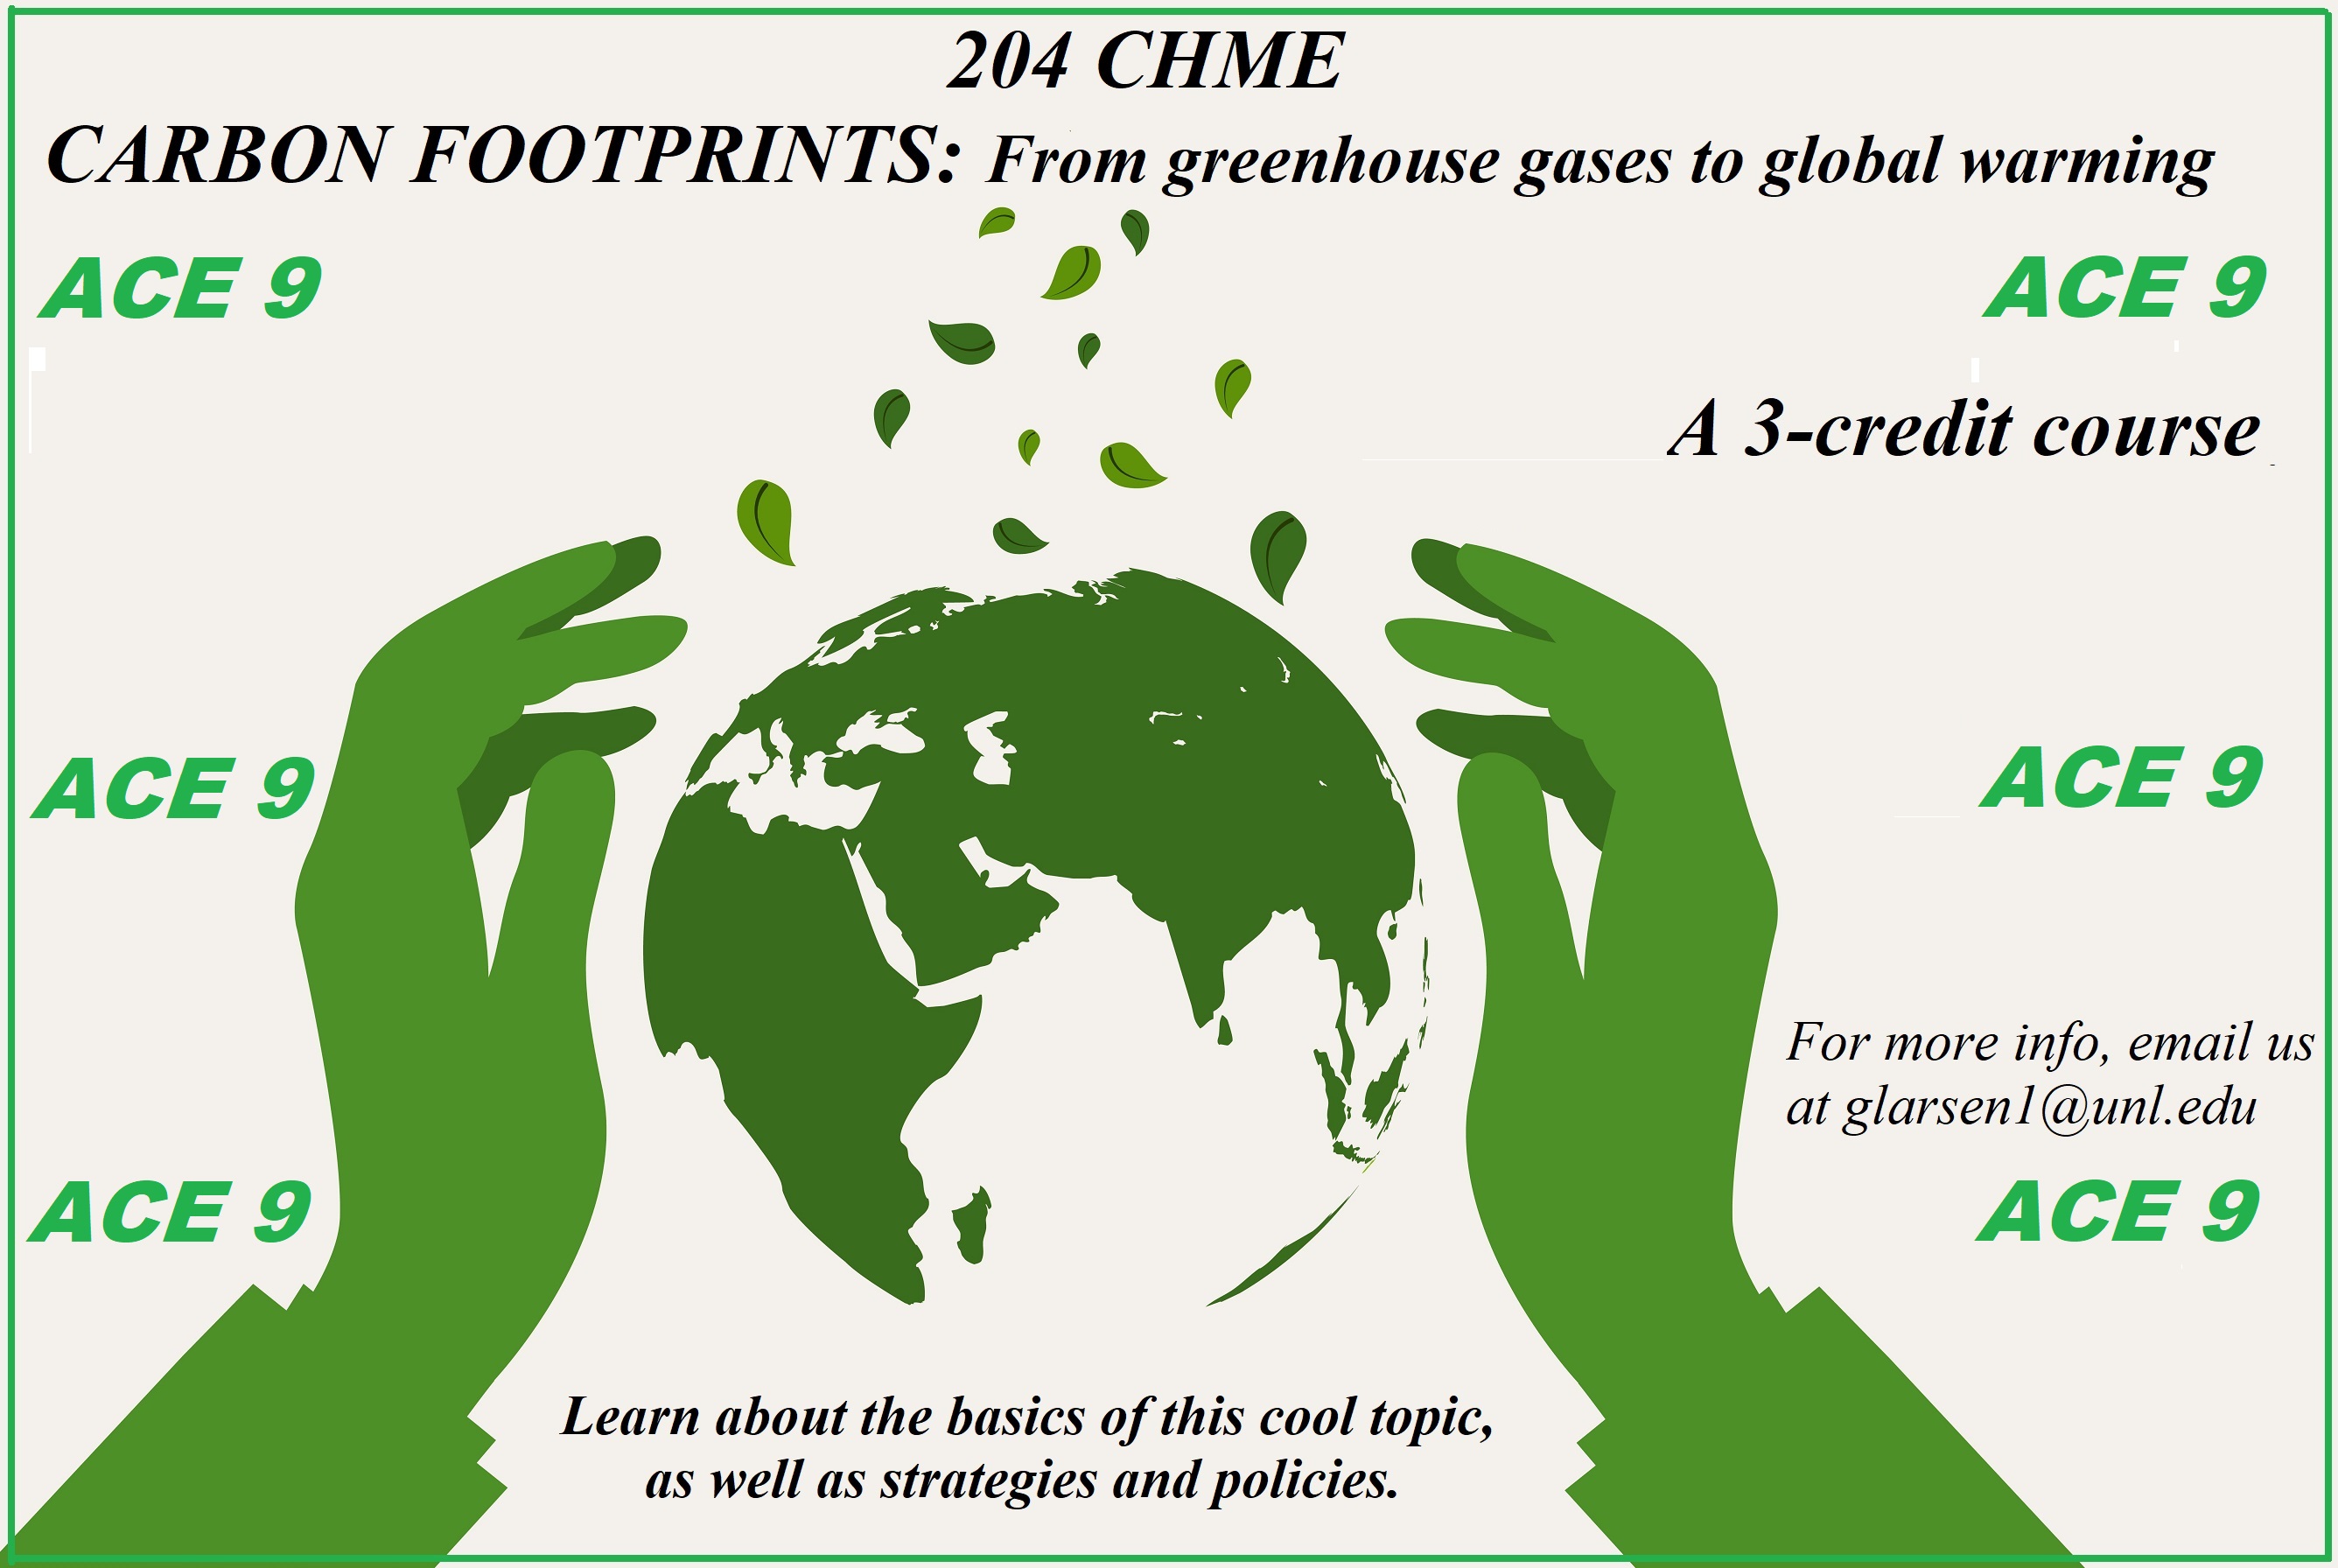 CHME 204: Carbon Footprints: From Greenhouse Gases to Global Warming